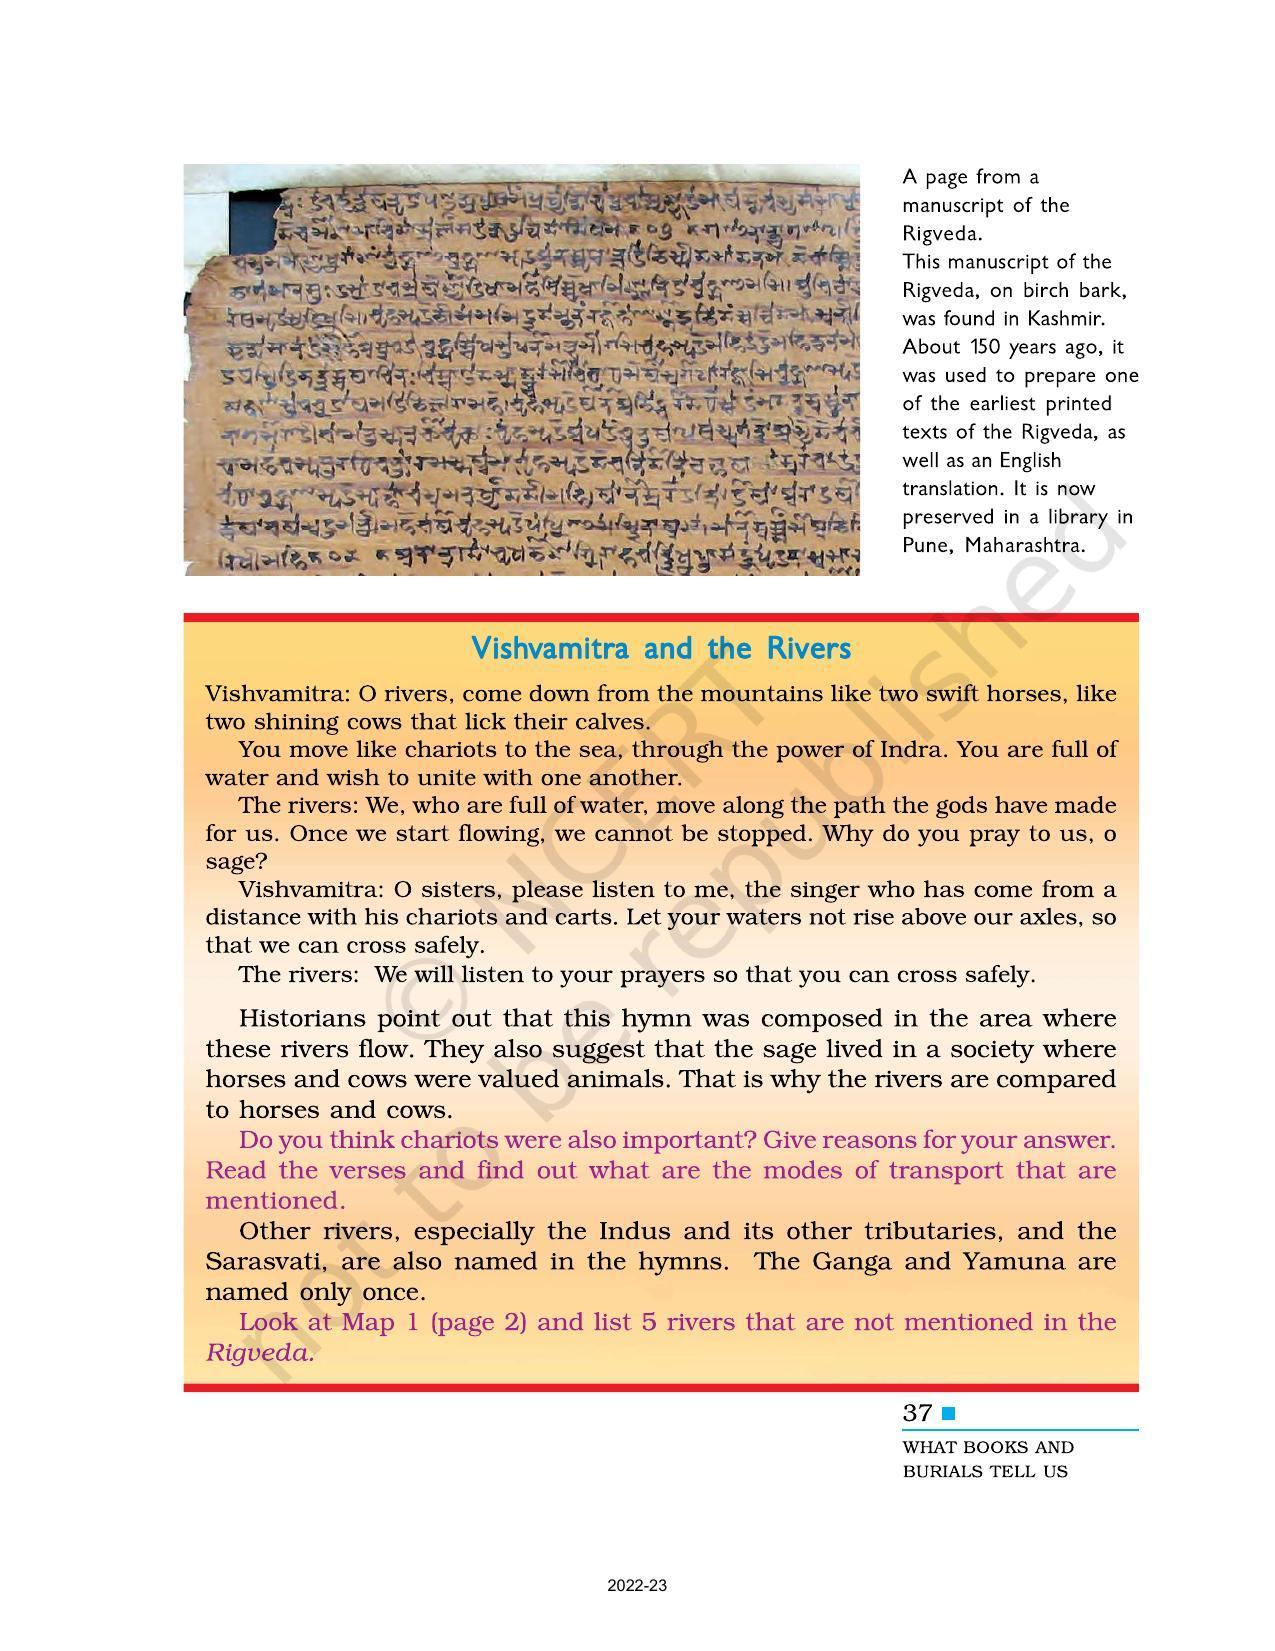 NCERT Book for Class 6 Social Science(History) : Chapter 4-What Books and Burials Tell Us - Page 3